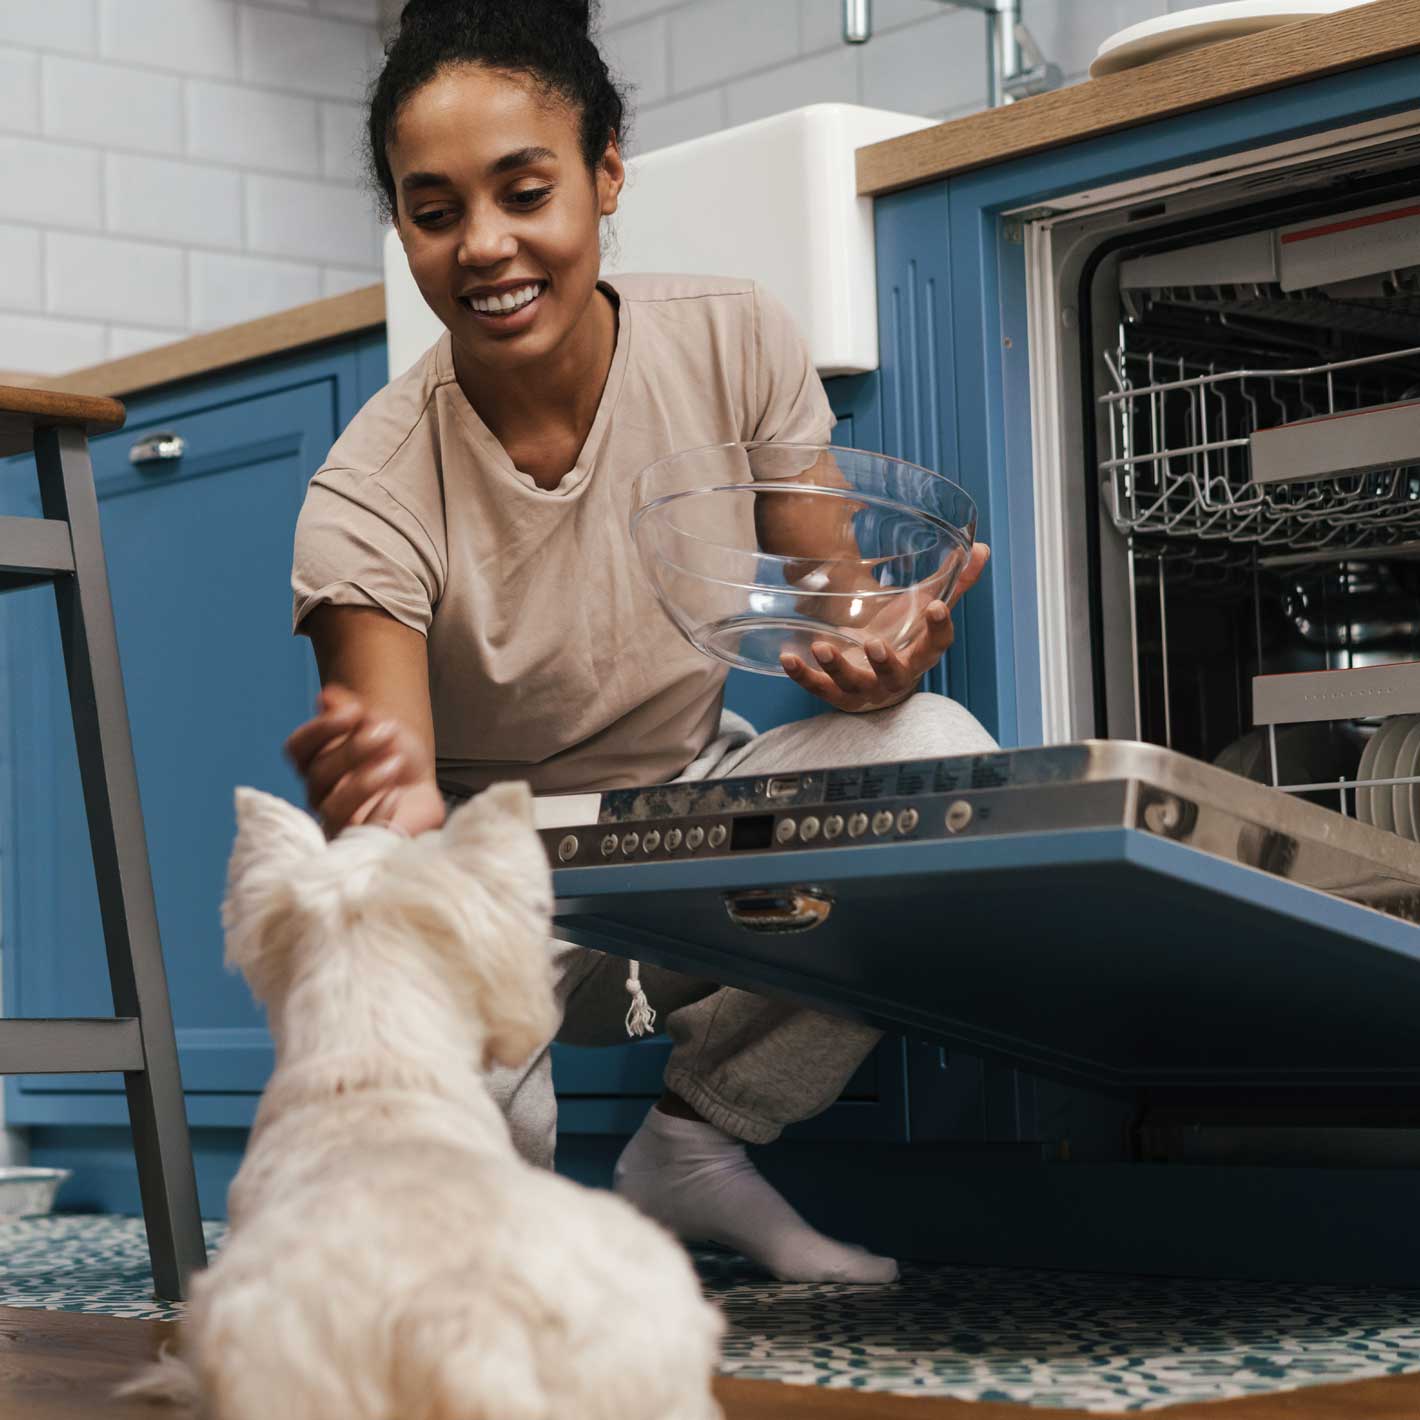 Young woman playing with her dog while emptying the dishwasher.